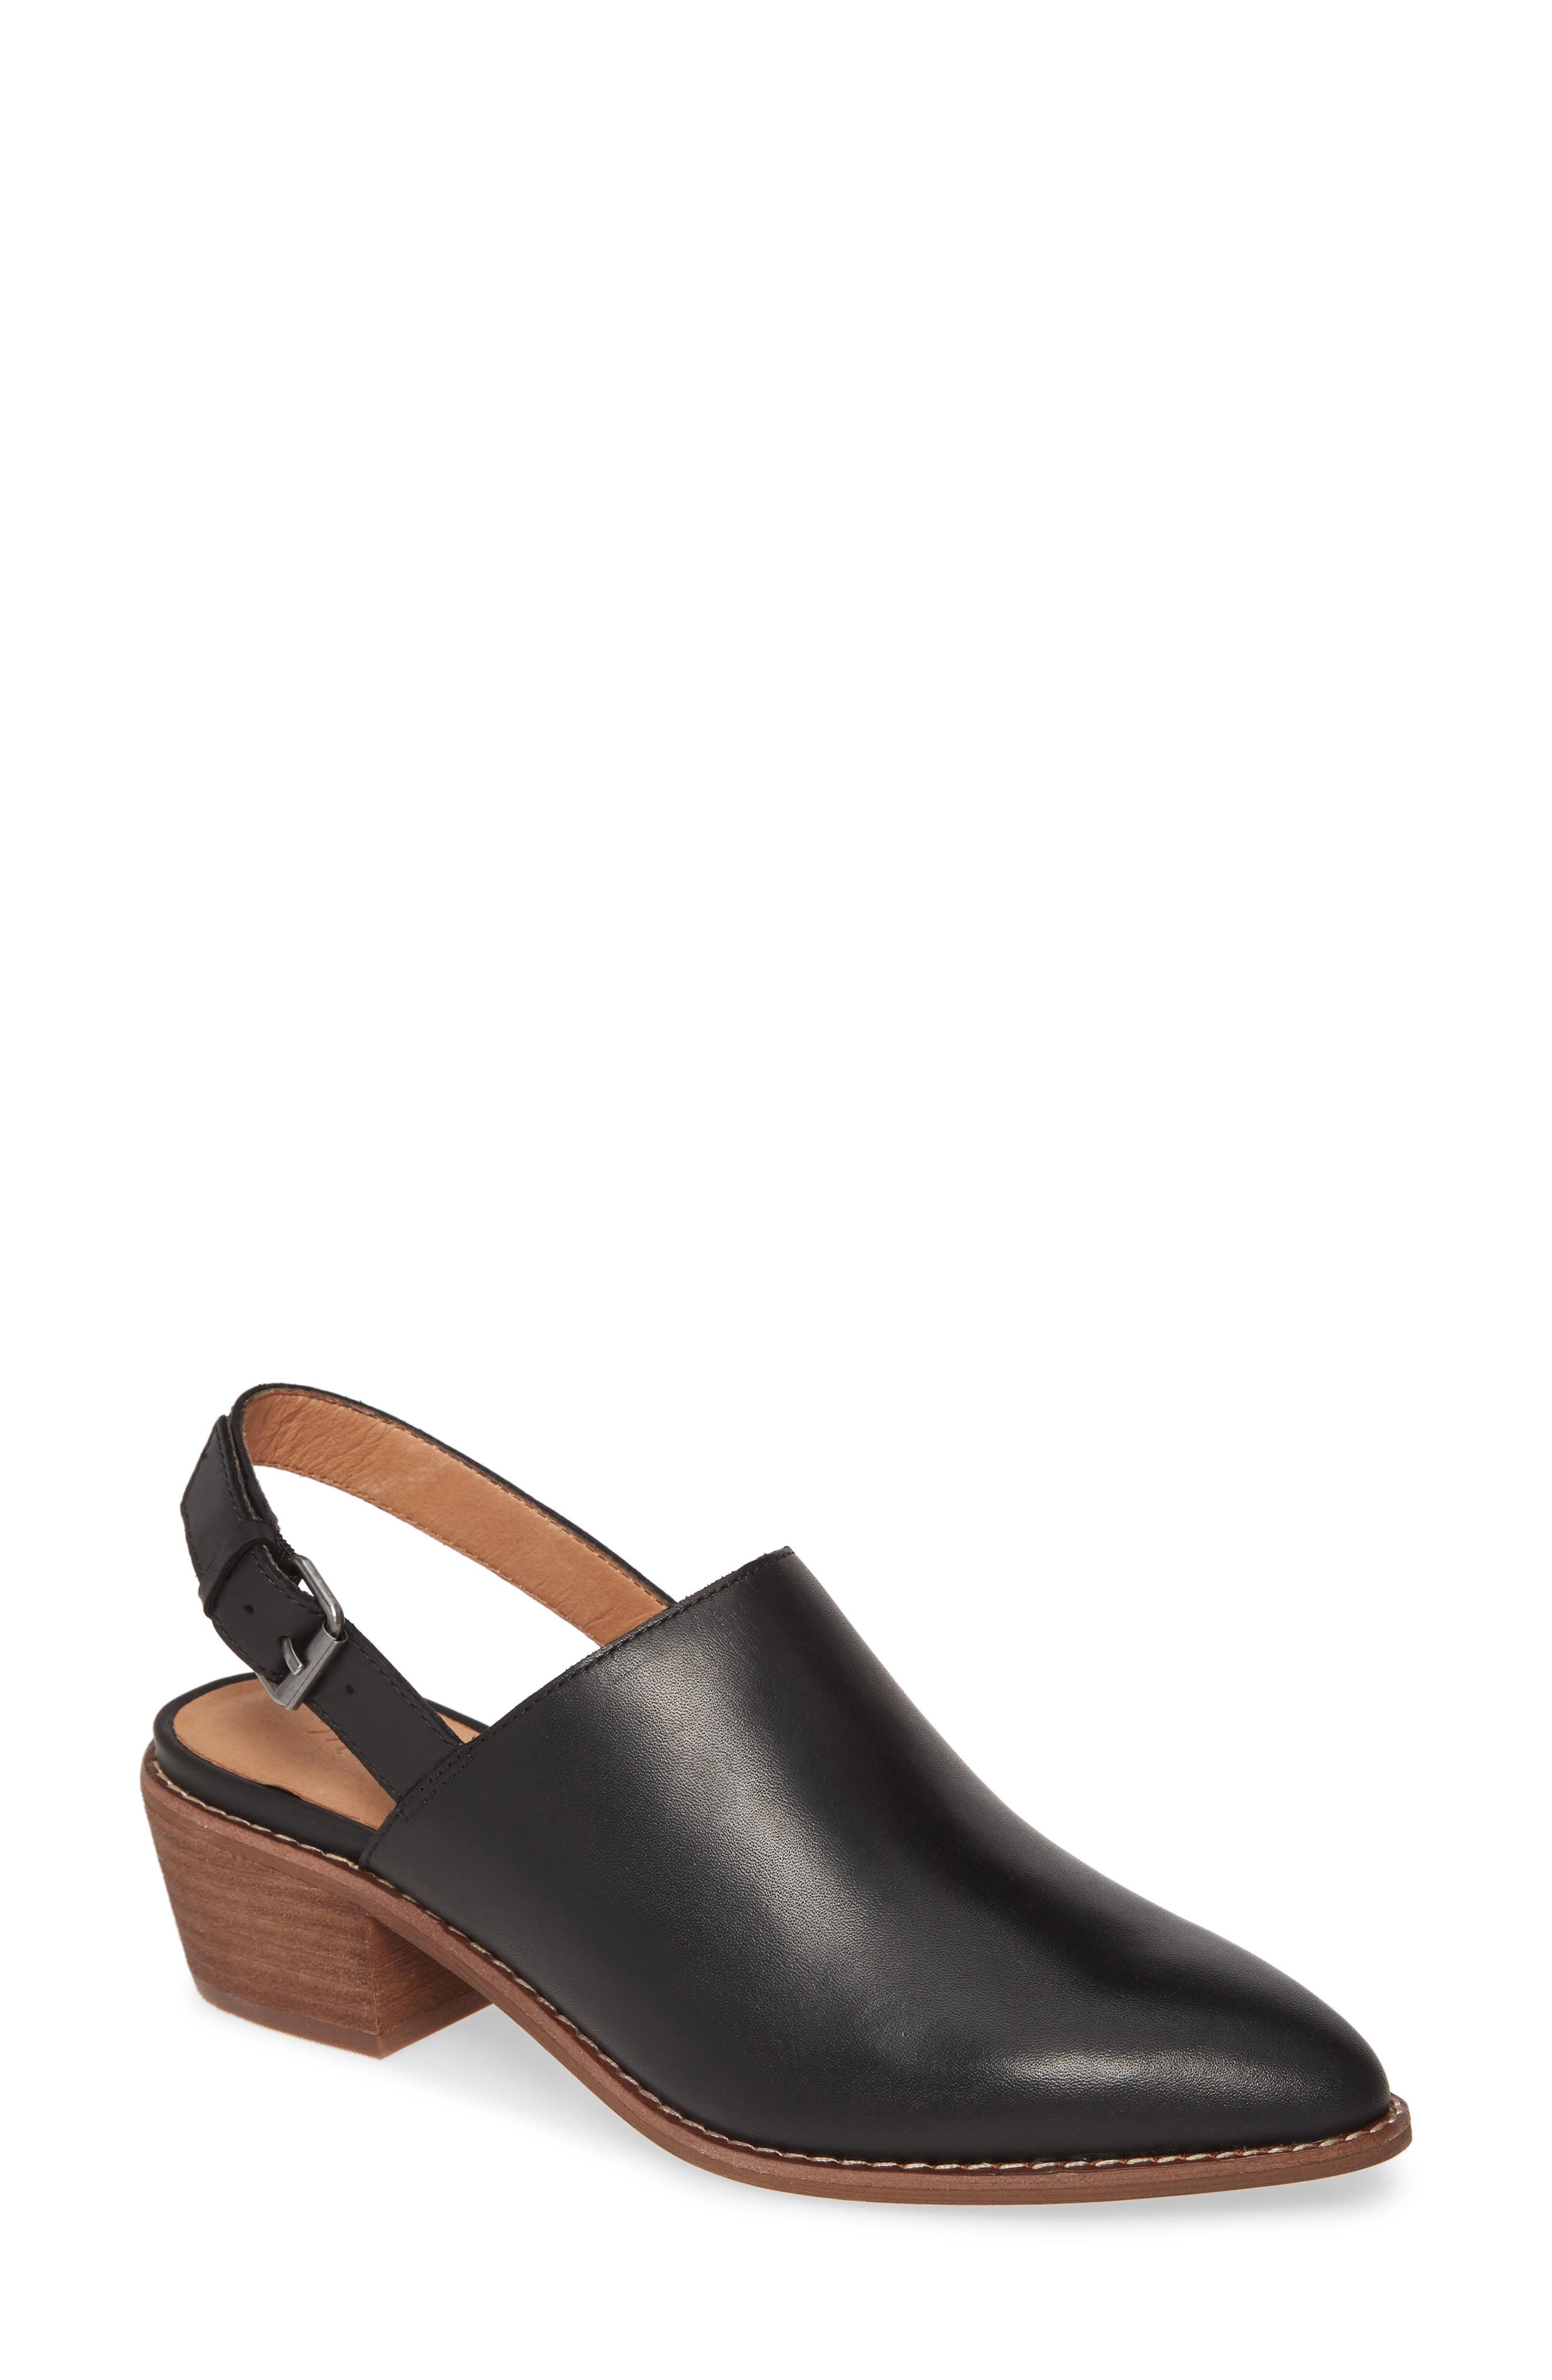 nordstrom madewell mules